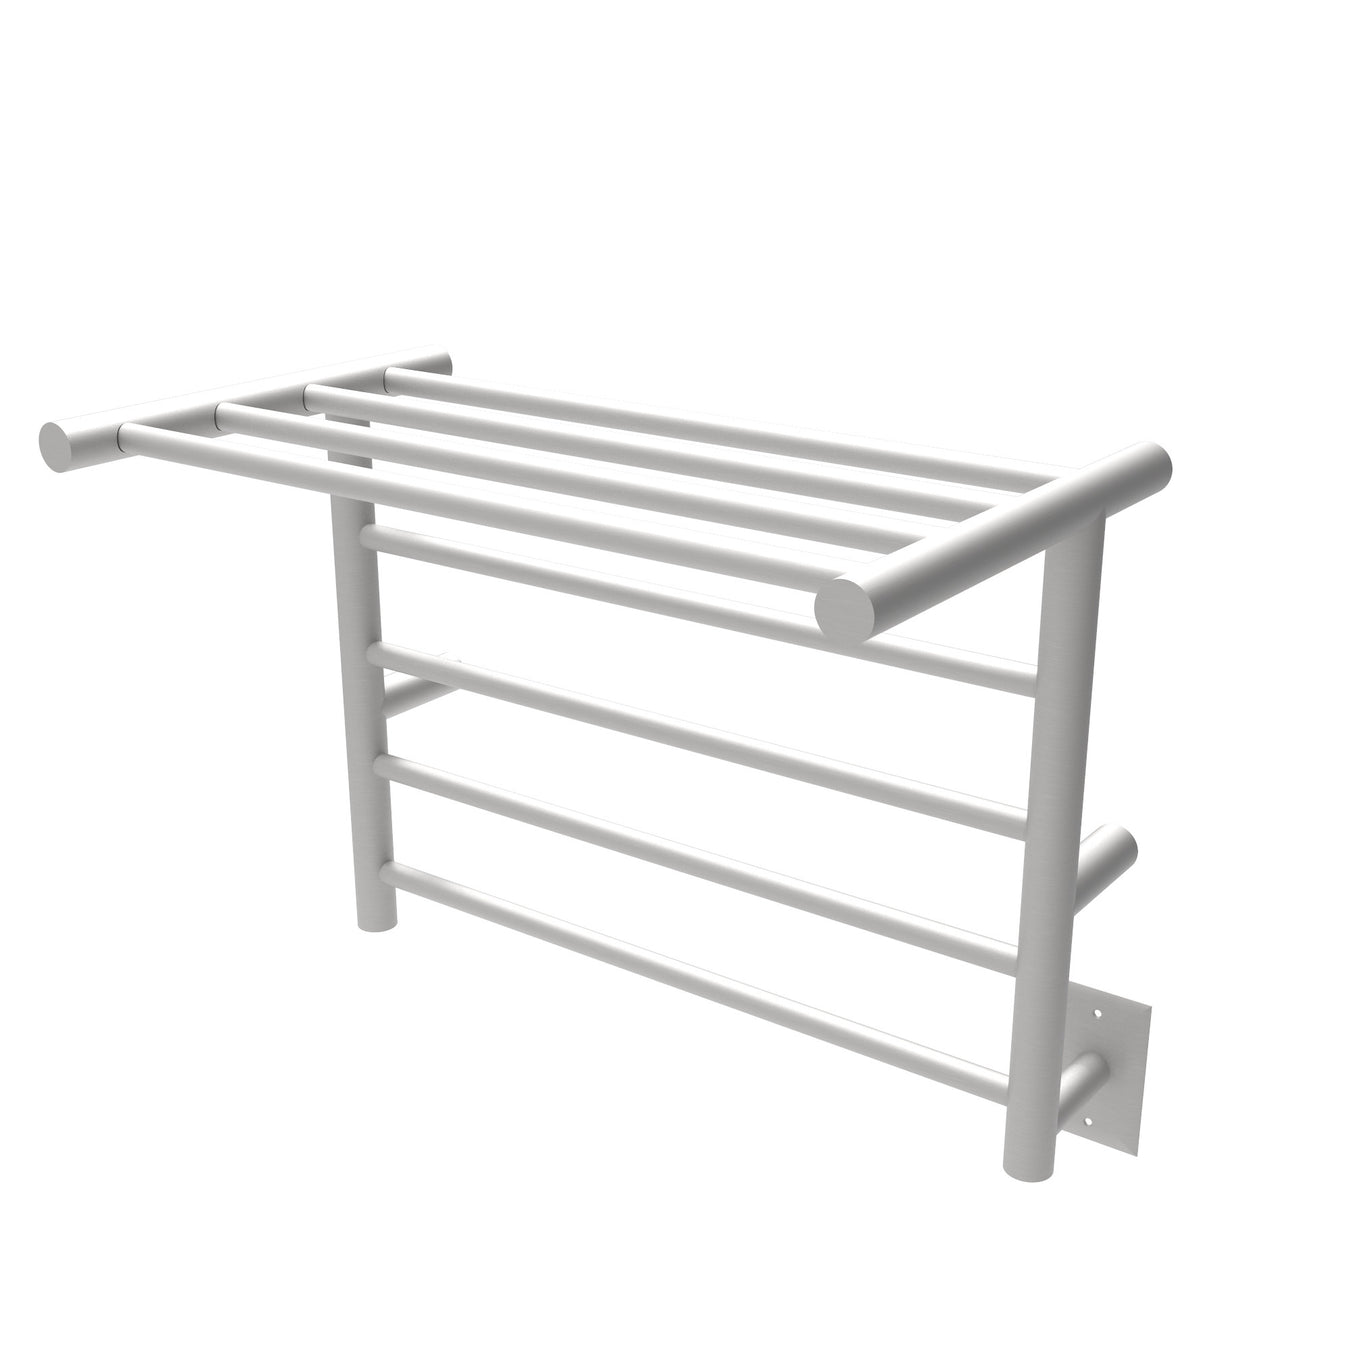 Amba Products Radiant Collection Shelf Towel Warmers